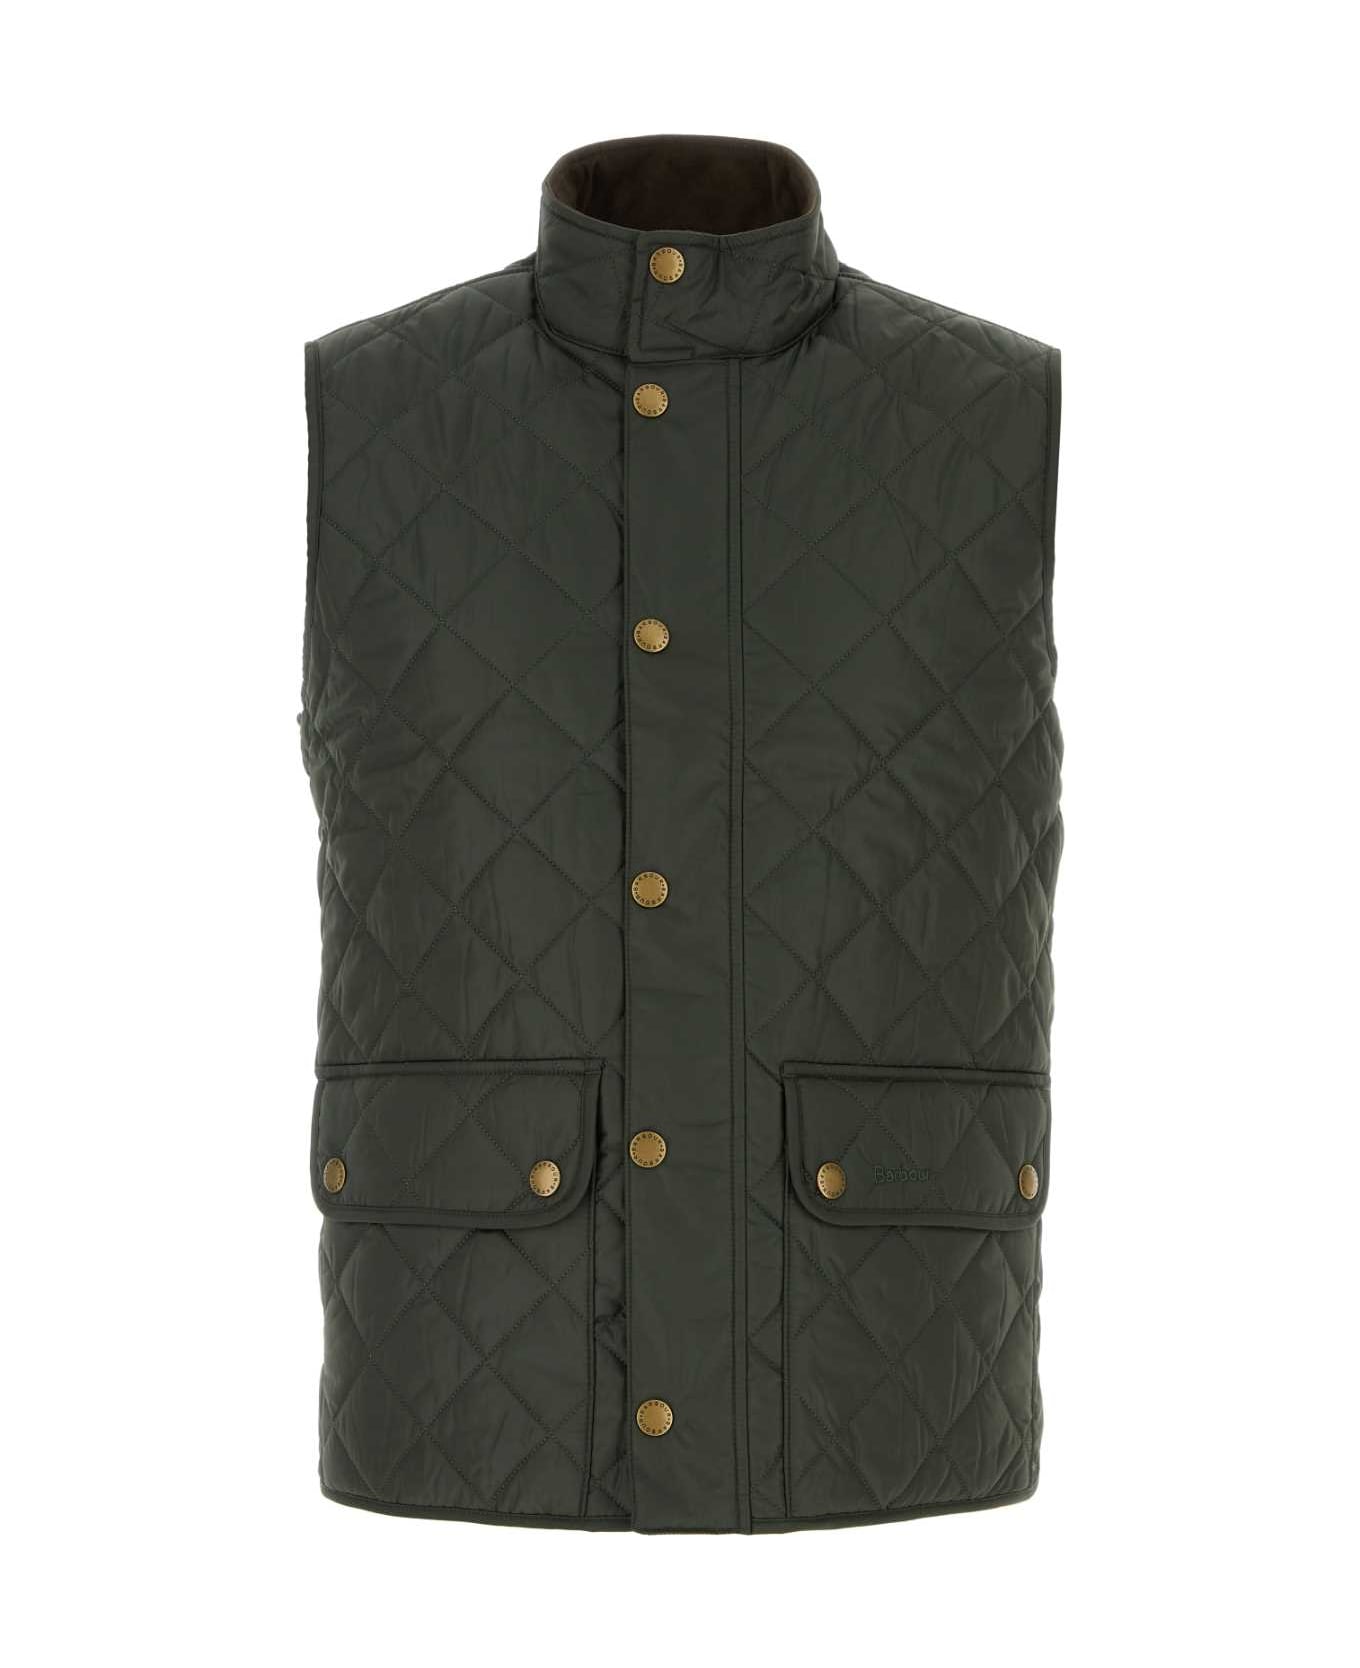 Barbour Olive Green Polyester Lowerdale Sleeveless Jacket - SAGE ベスト